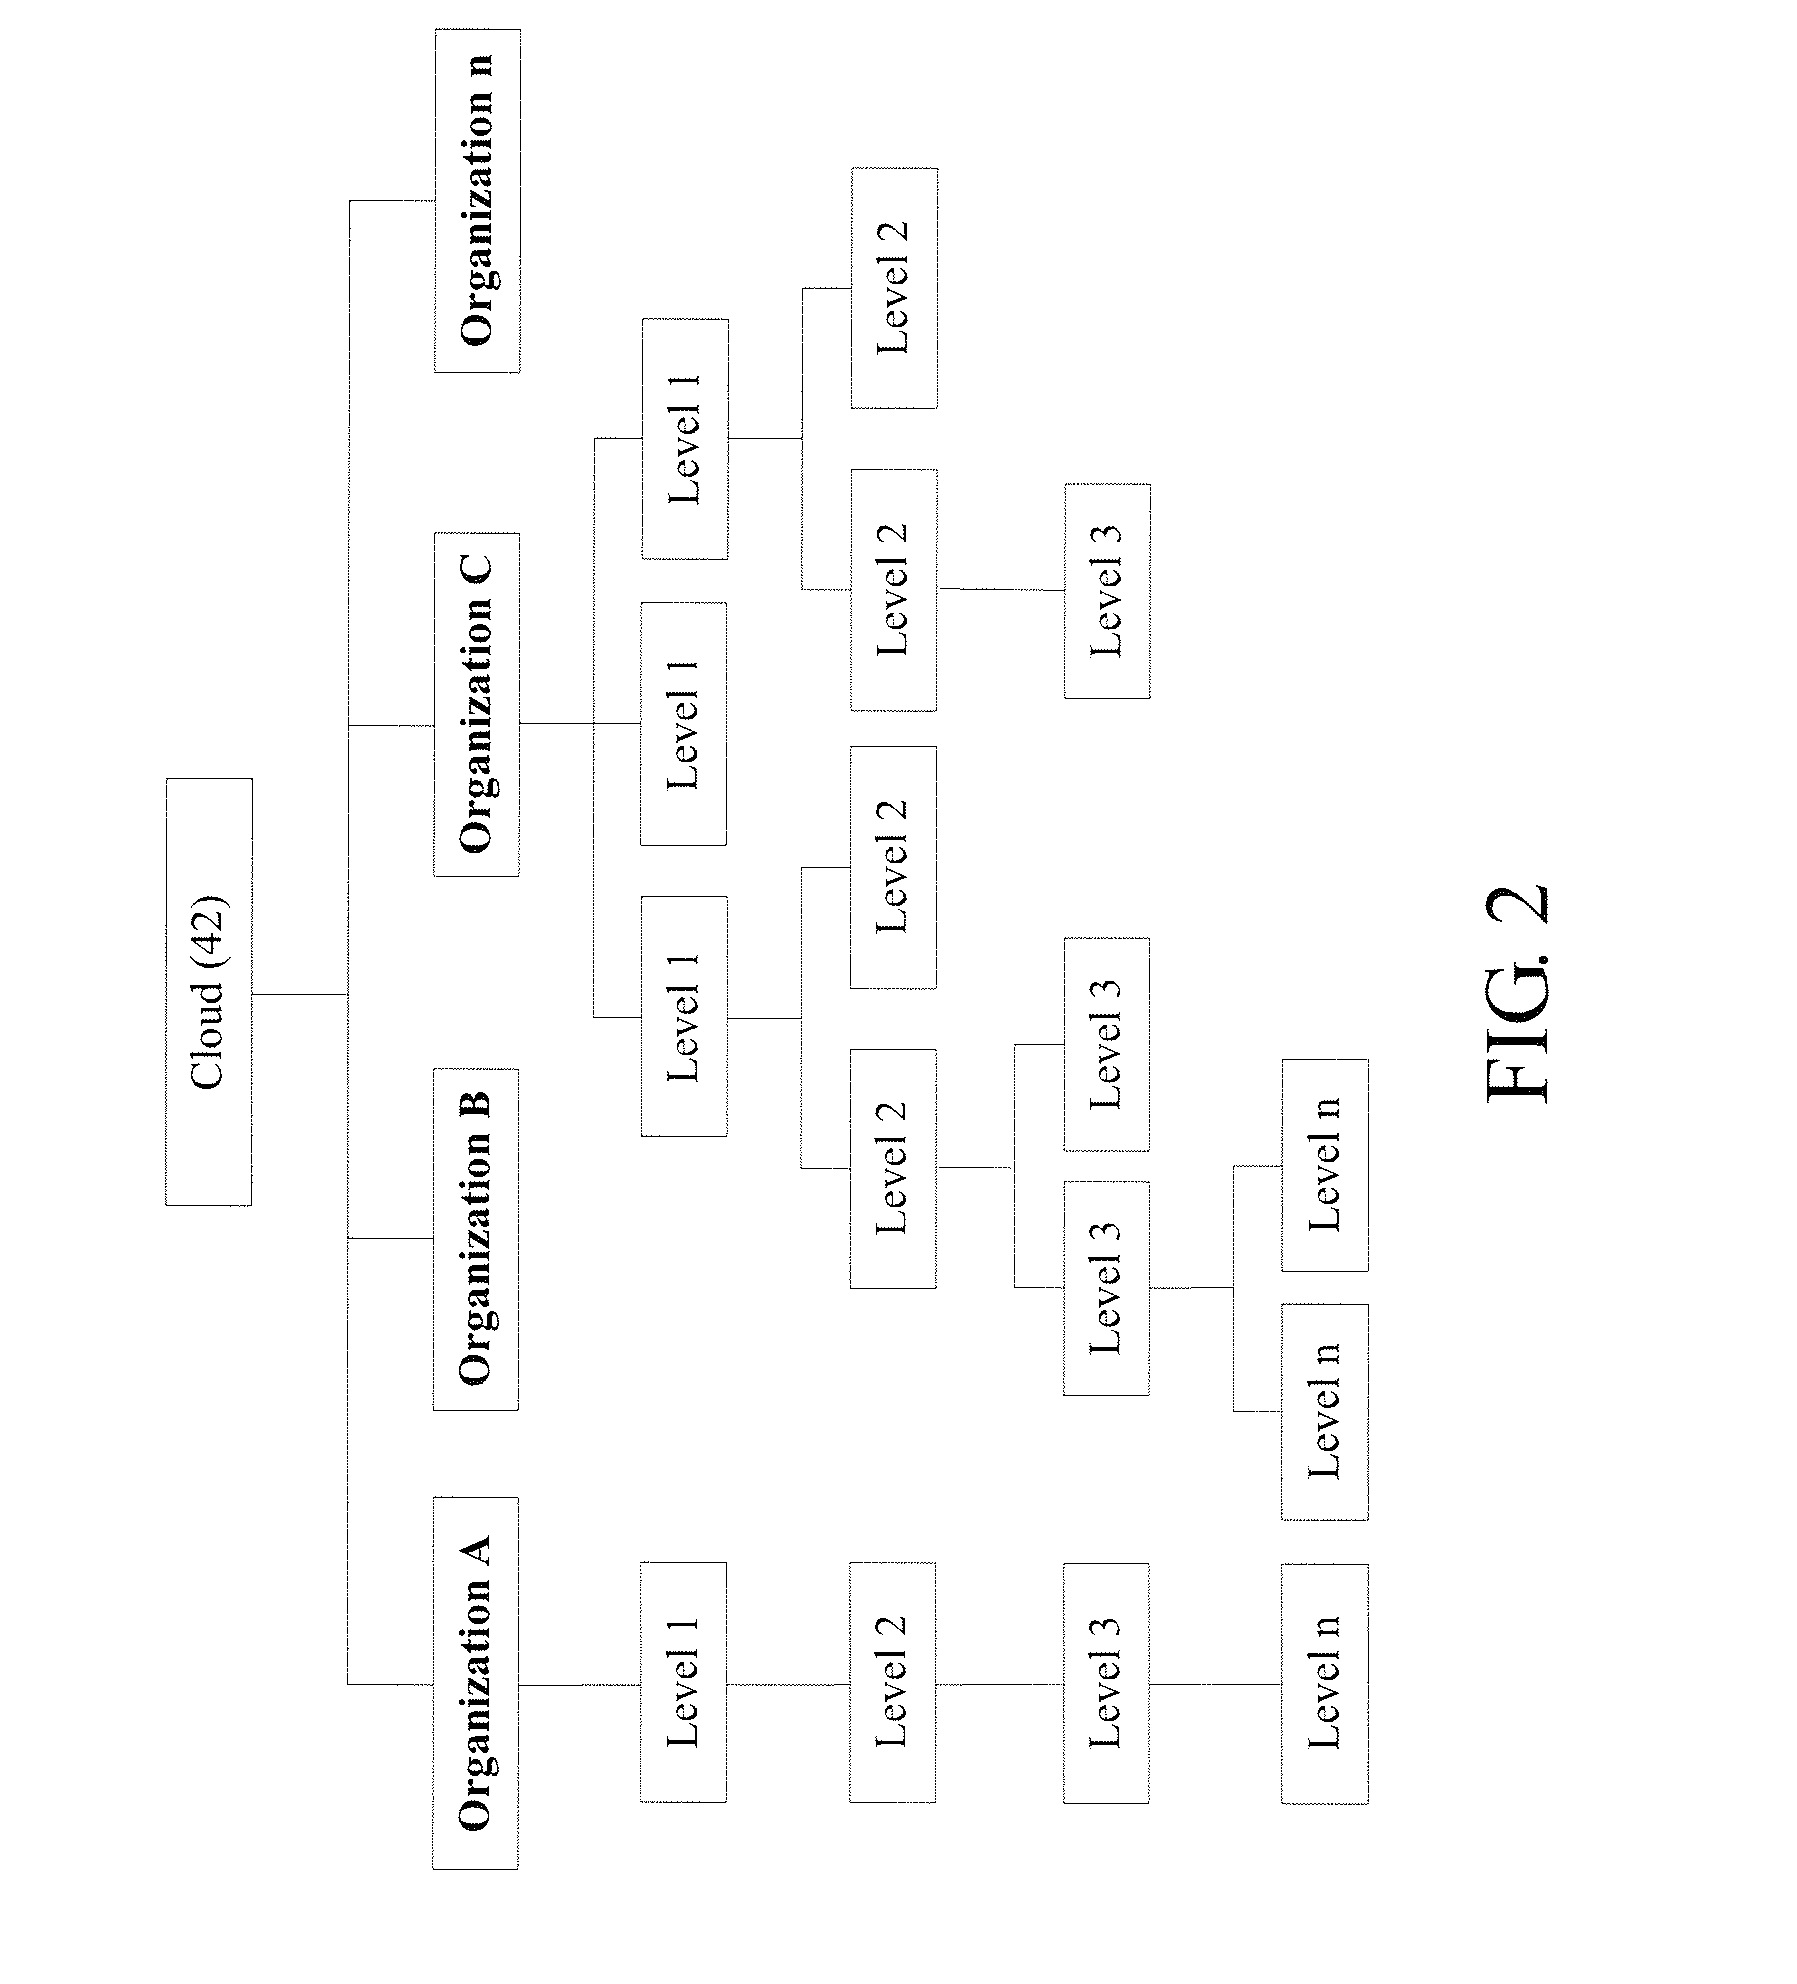 Message transmission system and method for a structure of a plurality of organizations